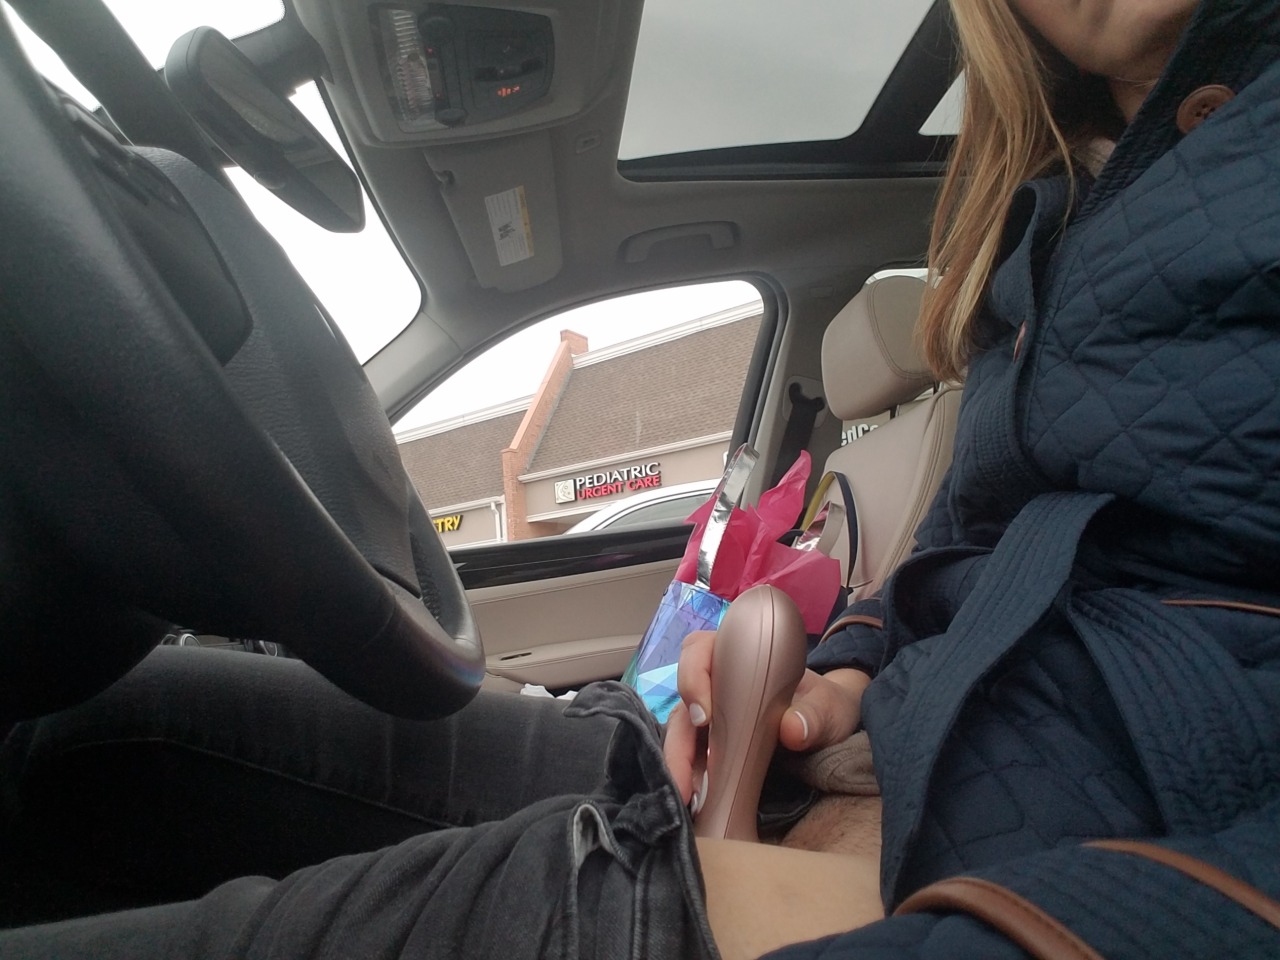 so, i took a break from shopping yesterday to cum in a public parking lot (again).